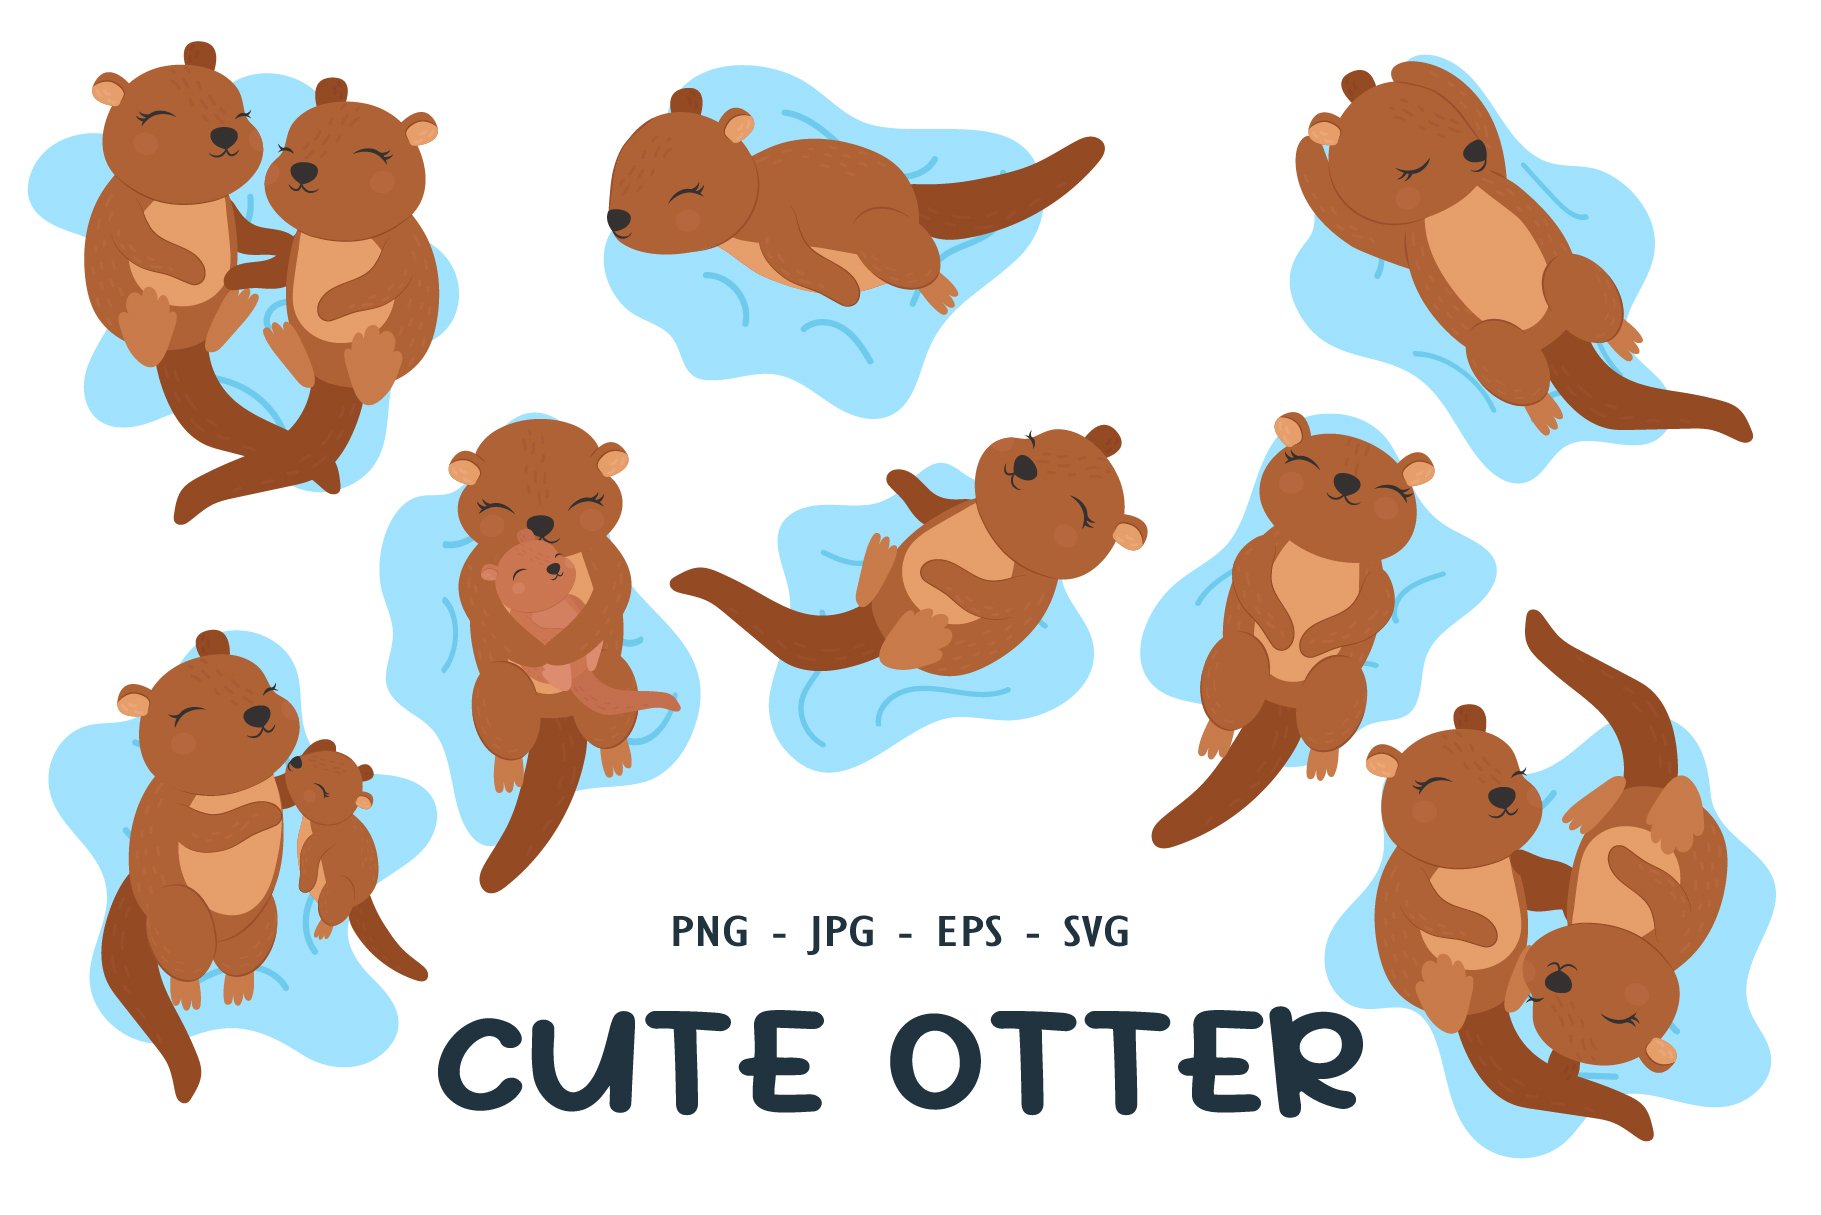 Cute Otter Clipart Illustration cover image.